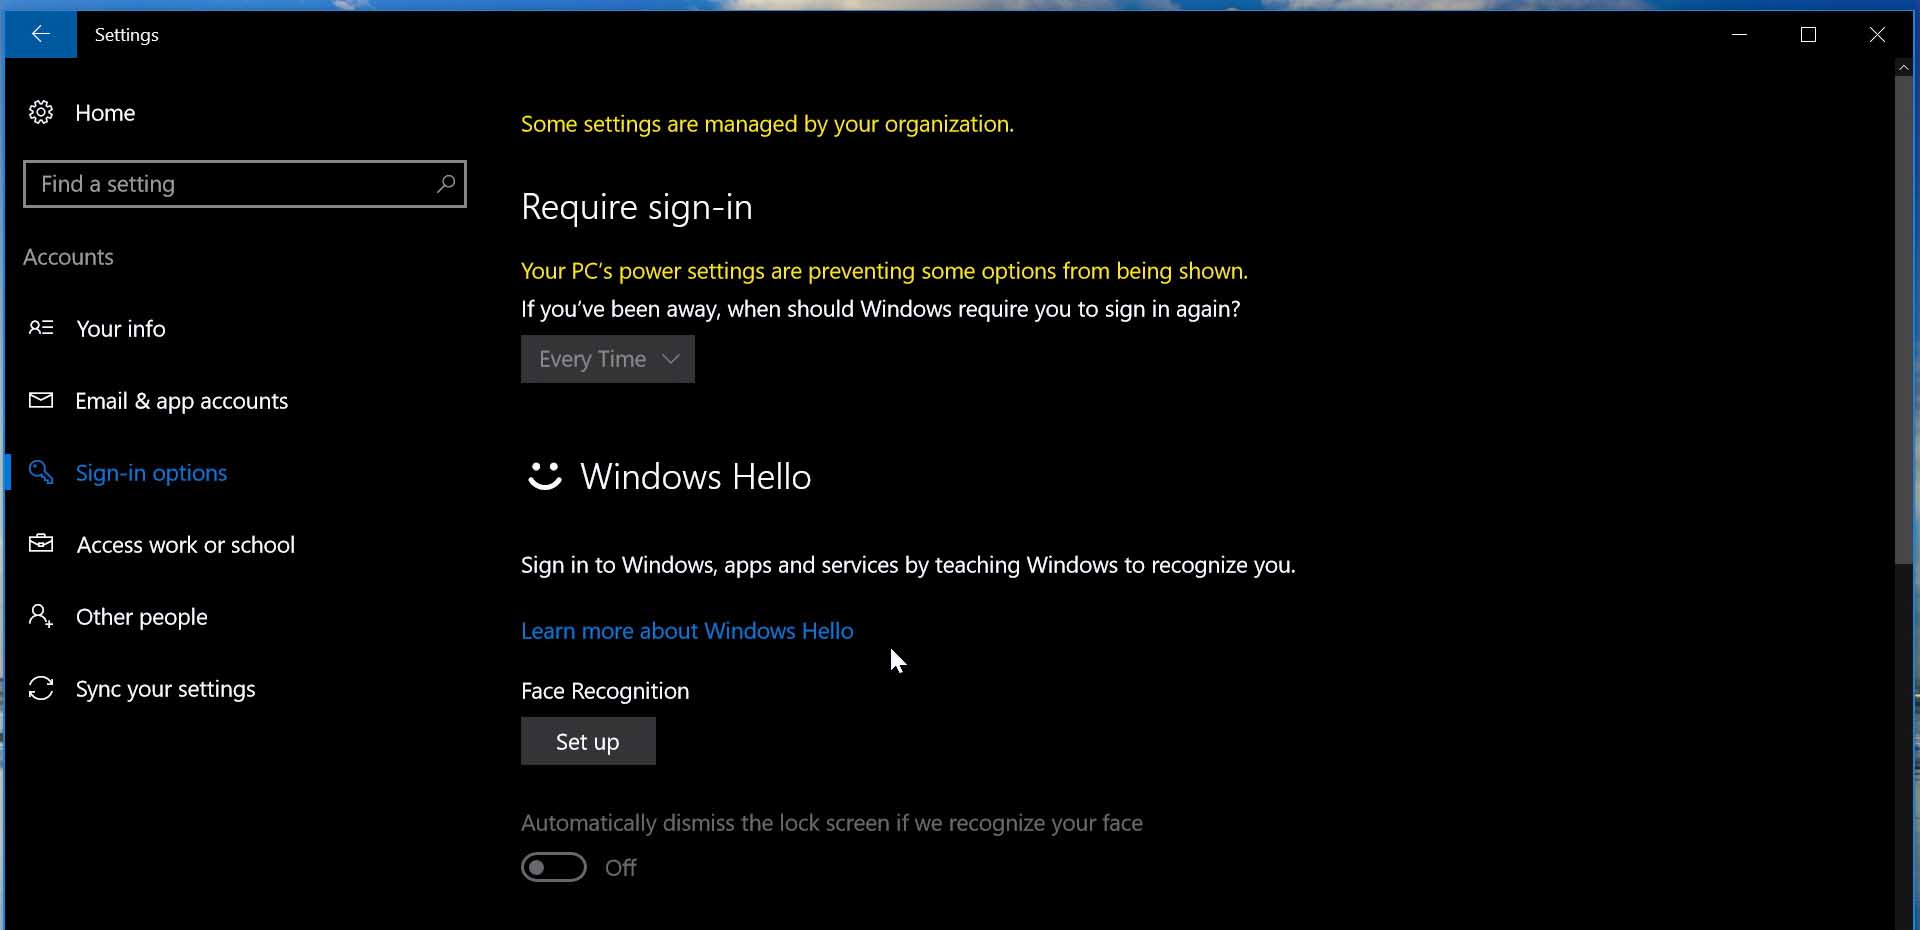 How to get started with Windows Hello